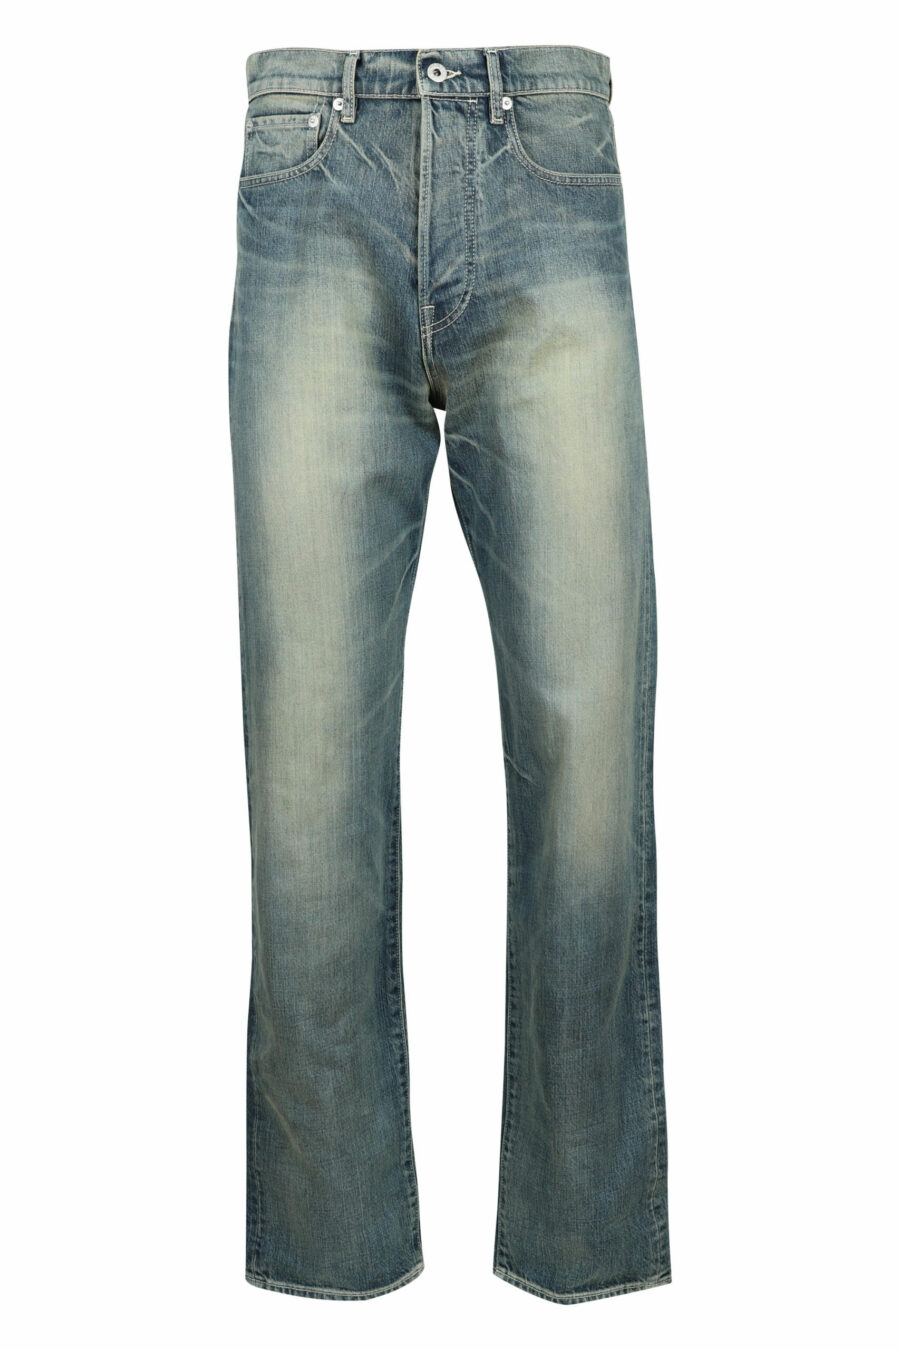 Blue frayed jeans with "k" logo - 3612230591110 1 scaled